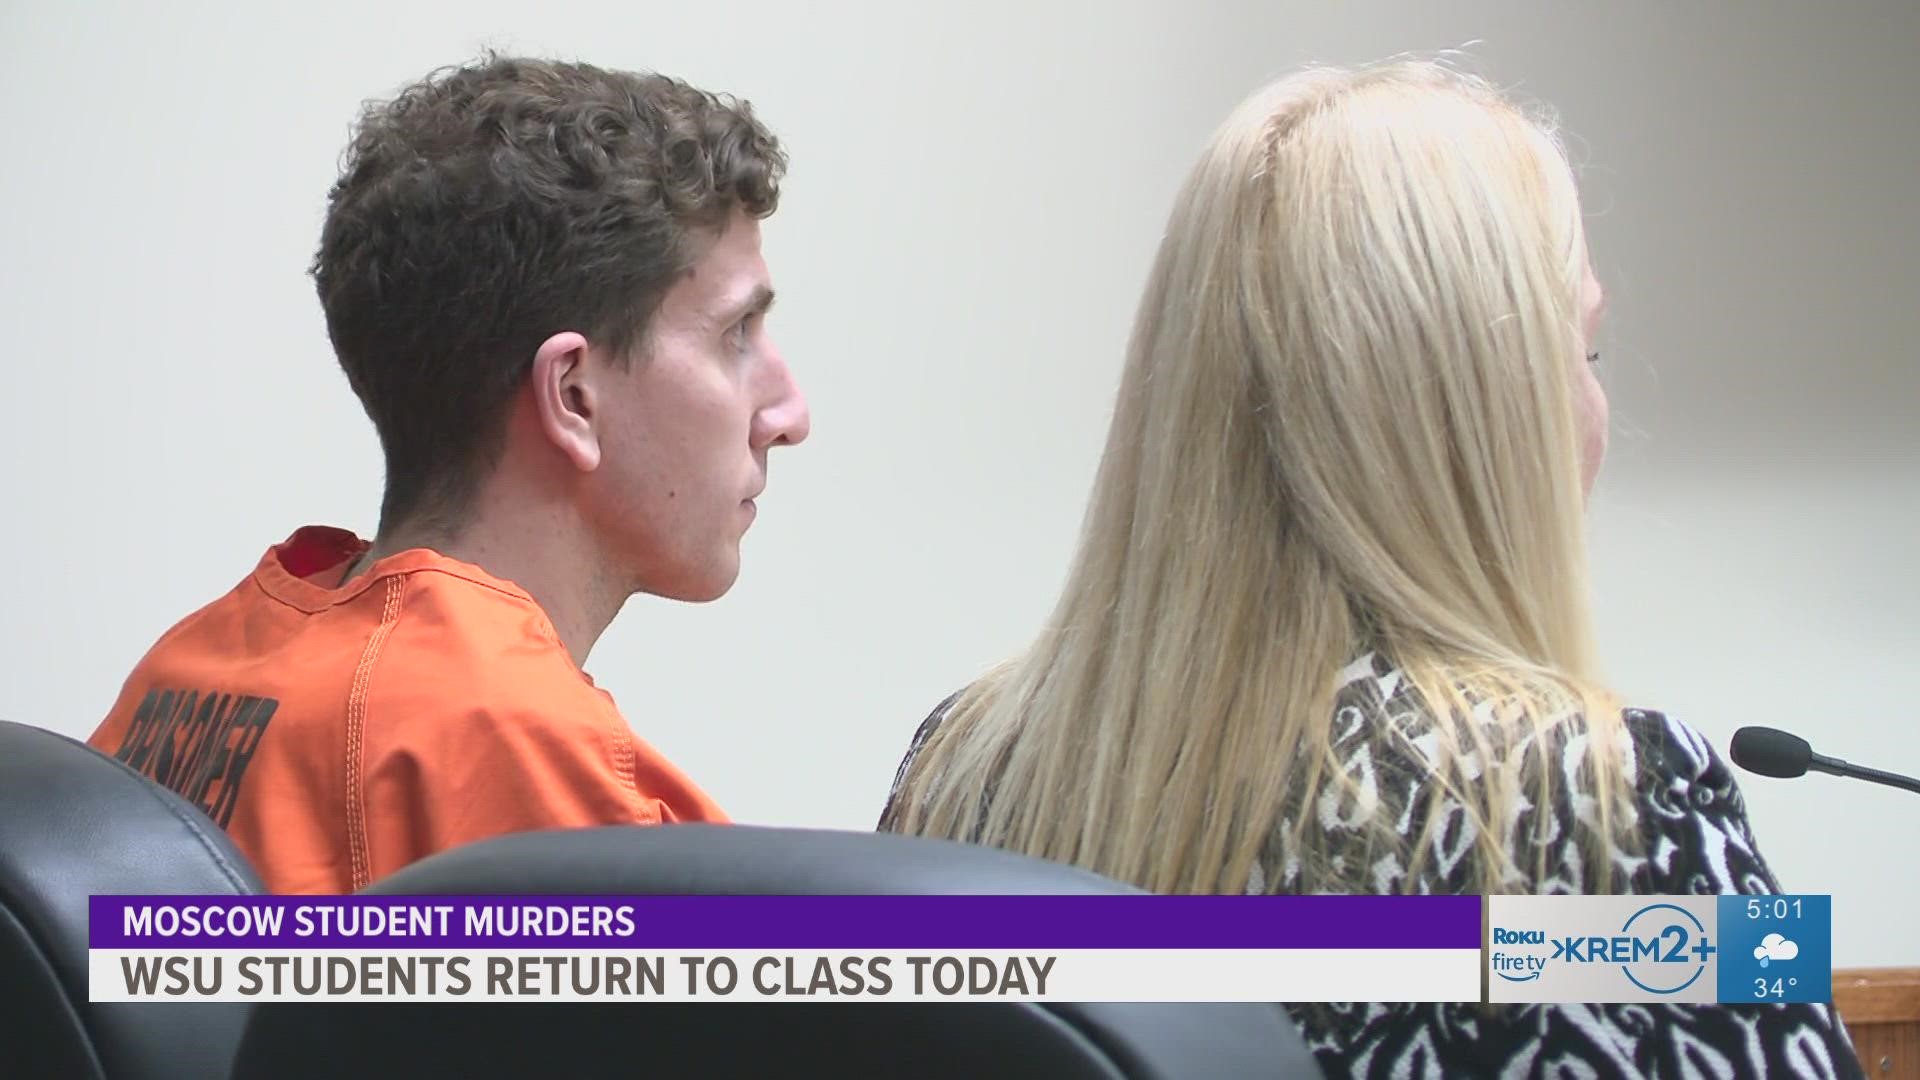 WSU students went back to campus after a suspect in the Moscow murders was arrested.